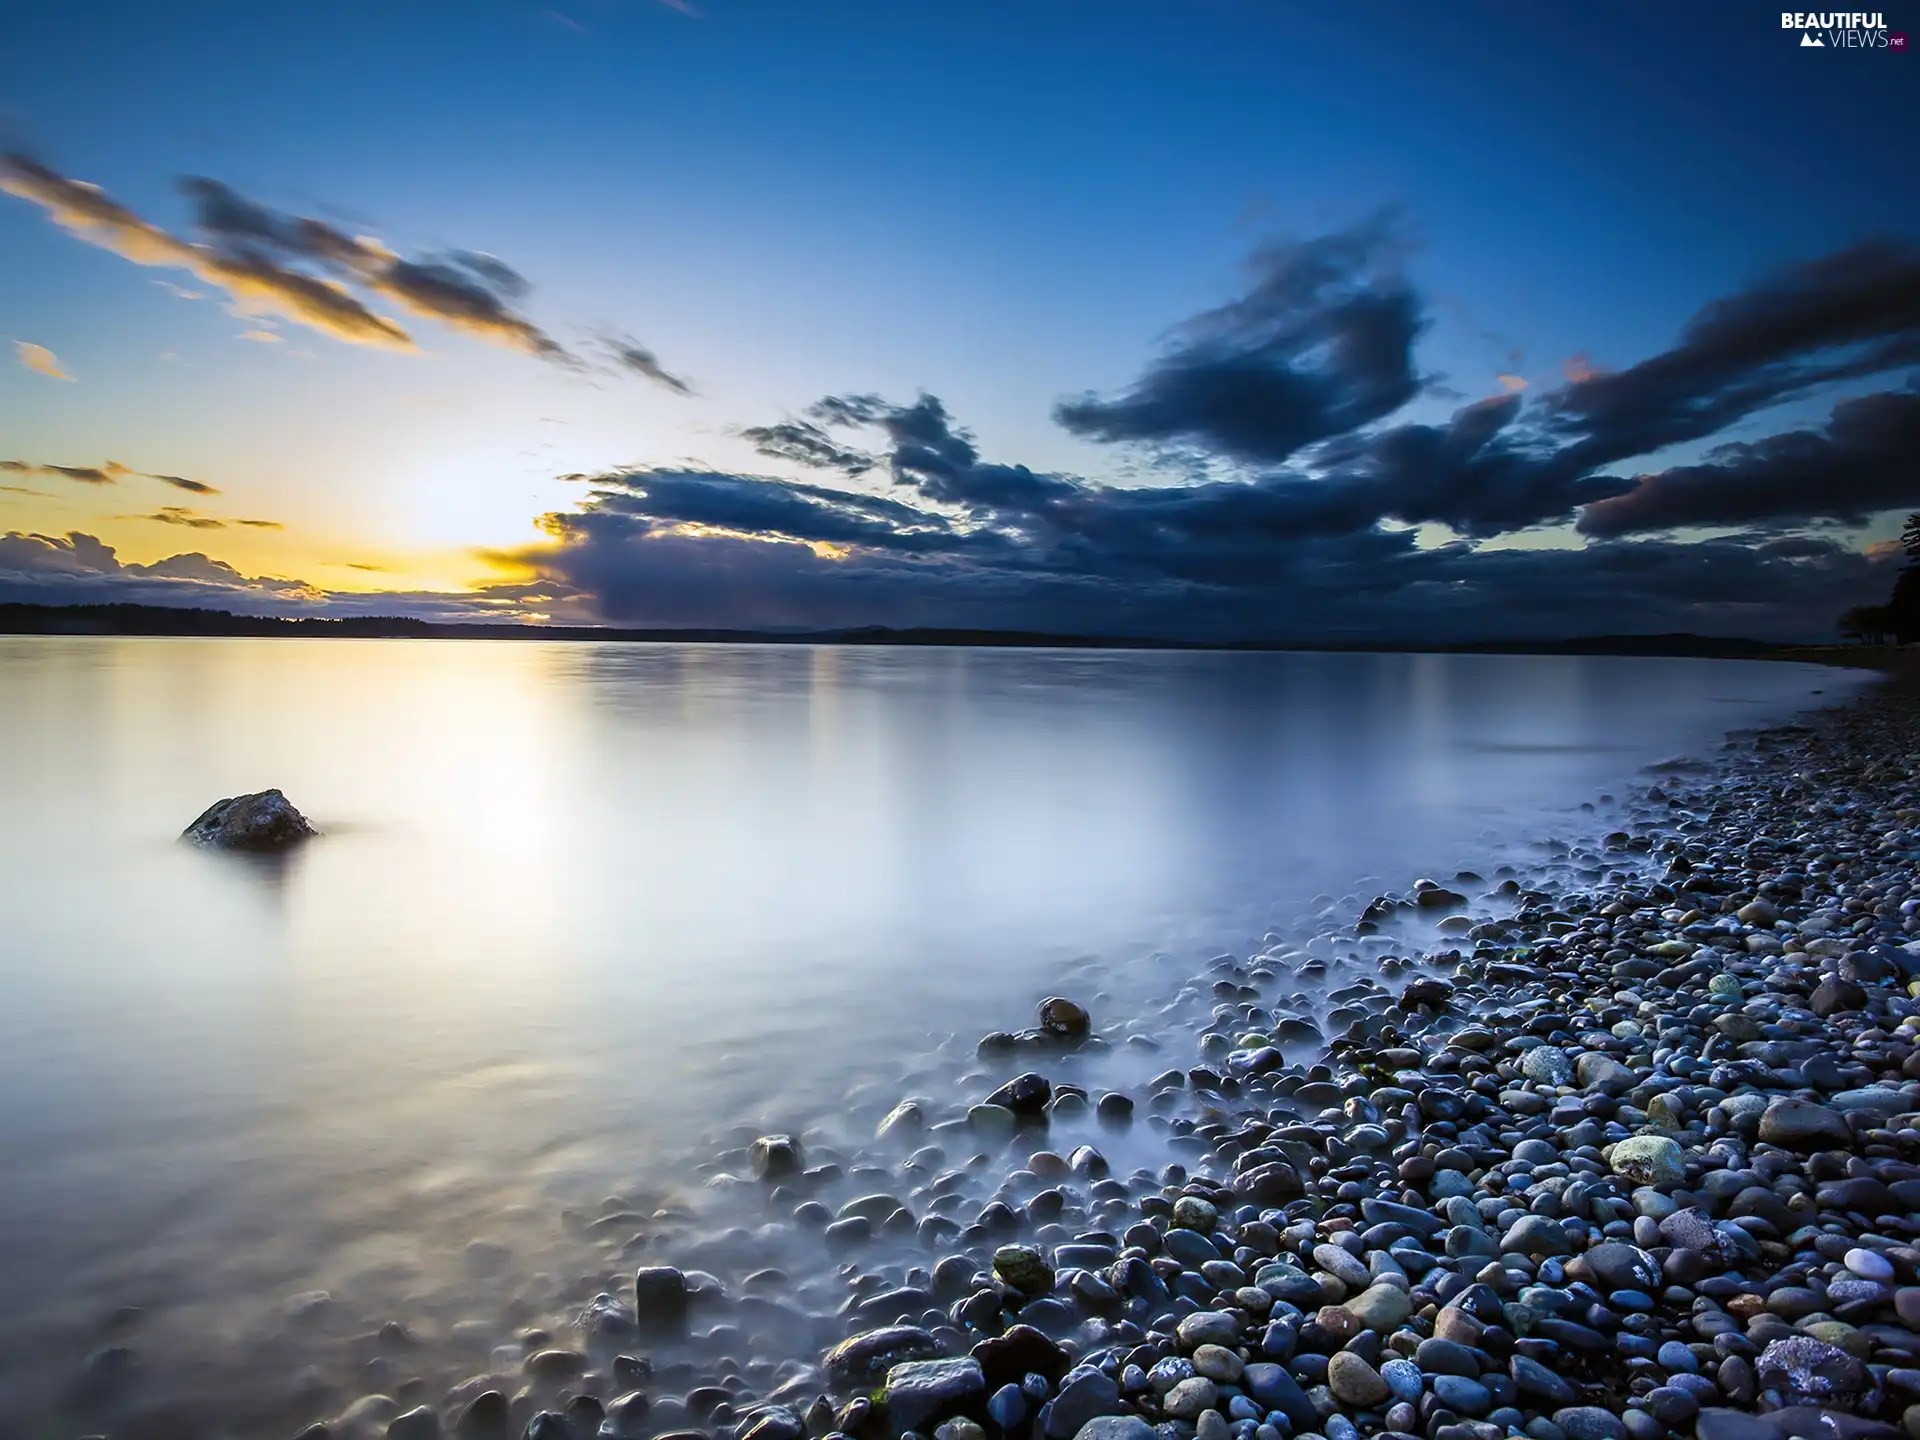 Great Sunsets, lake, pebbles